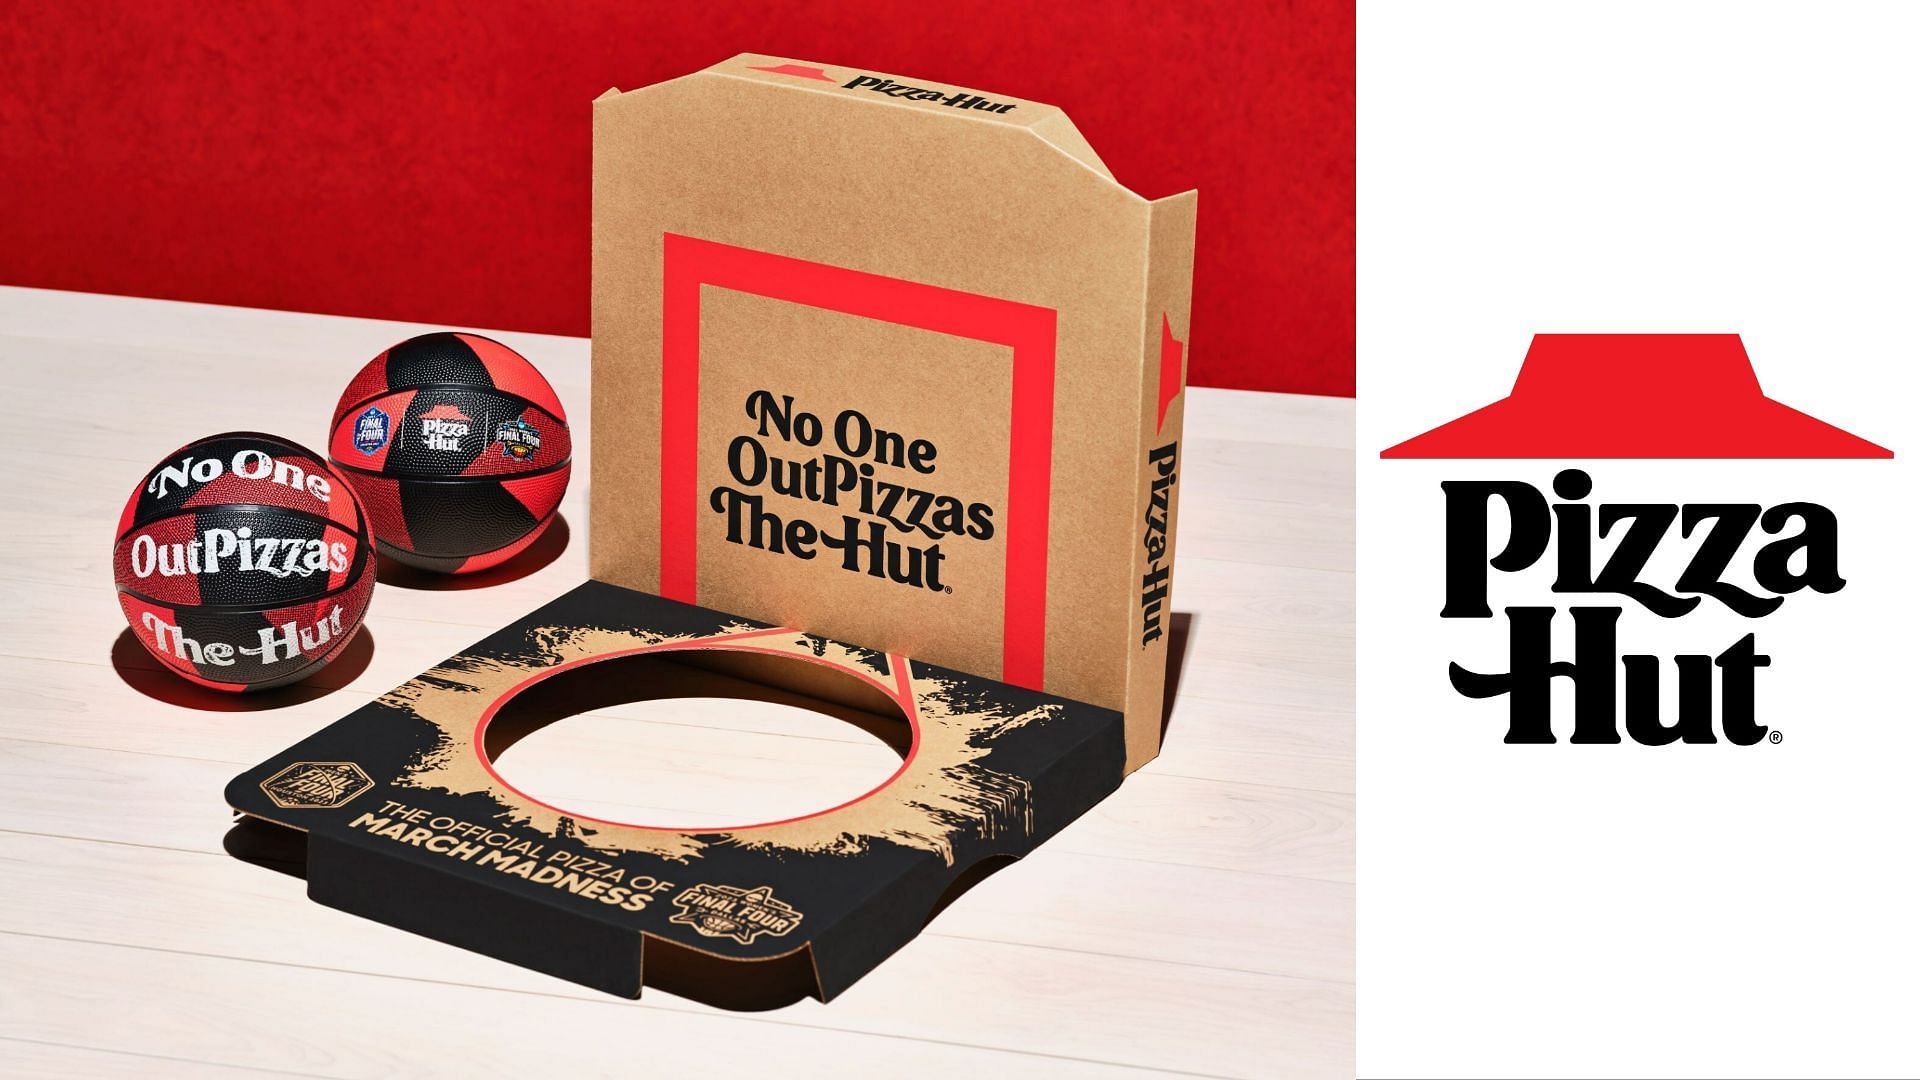 the Match Madness Mini Basketballs and the March Madness® Big New Yorker pizza boxes go together to make the March Madness® fun pair (Image via Pizza Hut)